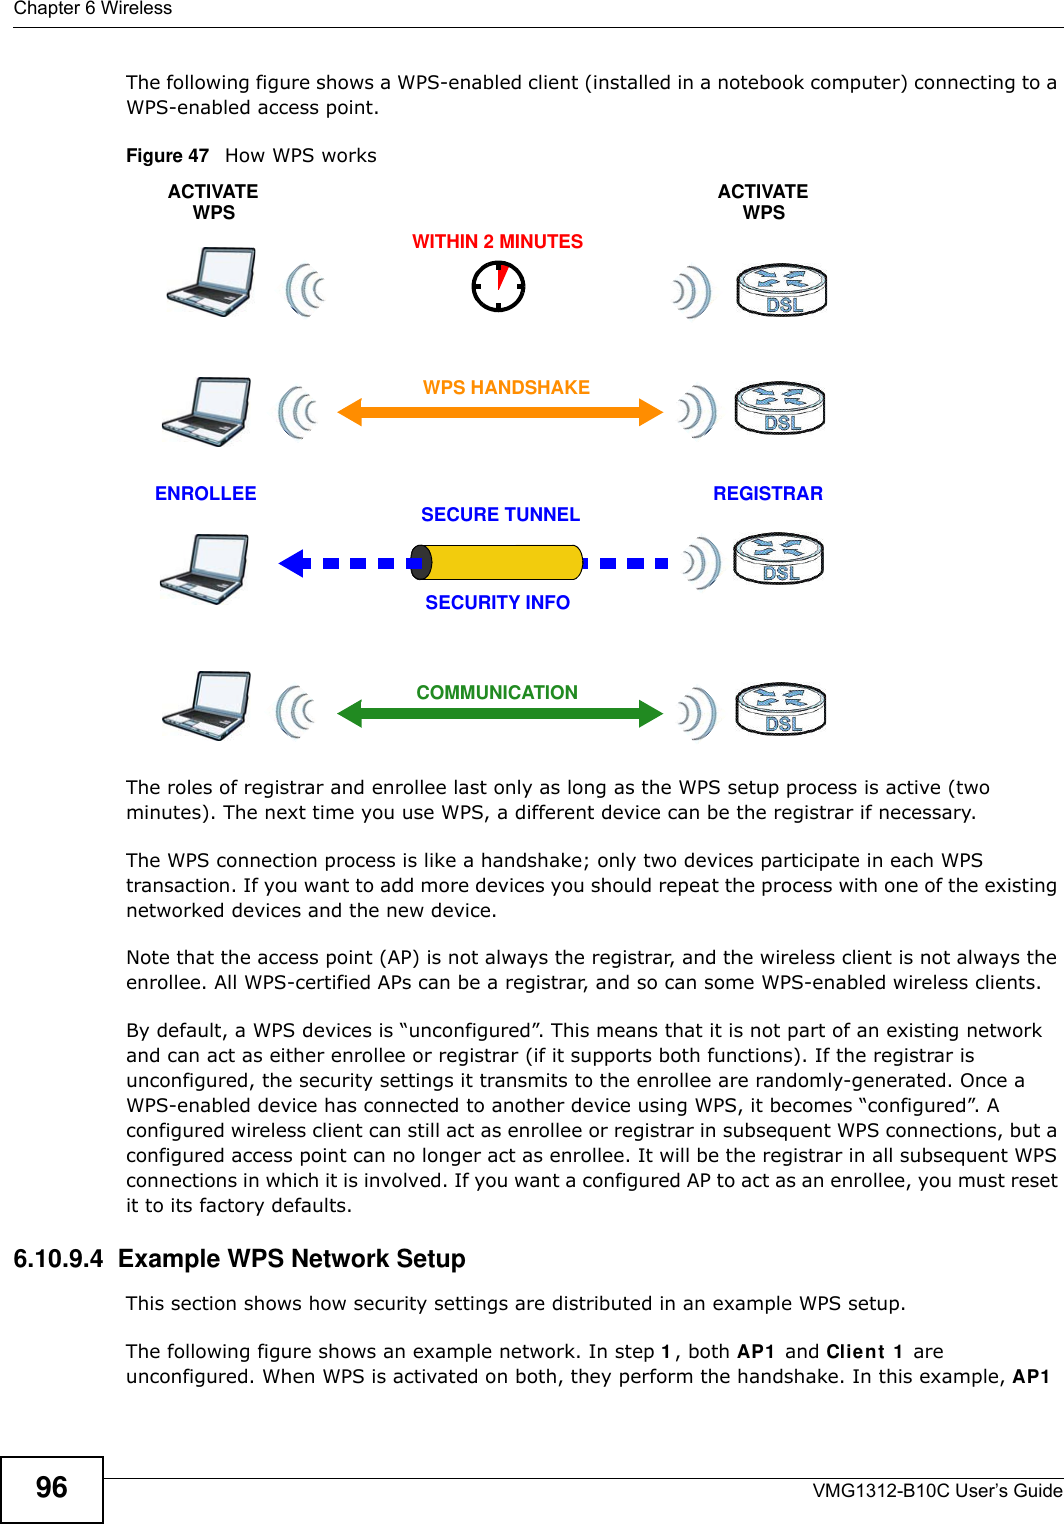 Chapter 6 WirelessVMG1312-B10C User’s Guide96The following figure shows a WPS-enabled client (installed in a notebook computer) connecting to a WPS-enabled access point.Figure 47   How WPS worksThe roles of registrar and enrollee last only as long as the WPS setup process is active (two minutes). The next time you use WPS, a different device can be the registrar if necessary.The WPS connection process is like a handshake; only two devices participate in each WPS transaction. If you want to add more devices you should repeat the process with one of the existing networked devices and the new device.Note that the access point (AP) is not always the registrar, and the wireless client is not always the enrollee. All WPS-certified APs can be a registrar, and so can some WPS-enabled wireless clients.By default, a WPS devices is “unconfigured”. This means that it is not part of an existing network and can act as either enrollee or registrar (if it supports both functions). If the registrar is unconfigured, the security settings it transmits to the enrollee are randomly-generated. Once a WPS-enabled device has connected to another device using WPS, it becomes “configured”. A configured wireless client can still act as enrollee or registrar in subsequent WPS connections, but a configured access point can no longer act as enrollee. It will be the registrar in all subsequent WPS connections in which it is involved. If you want a configured AP to act as an enrollee, you must reset it to its factory defaults.6.10.9.4  Example WPS Network SetupThis section shows how security settings are distributed in an example WPS setup.The following figure shows an example network. In step 1, both AP1  and Clie nt  1  are unconfigured. When WPS is activated on both, they perform the handshake. In this example, AP1  SECURE TUNNELSECURITY INFOWITHIN 2 MINUTESCOMMUNICATIONACTIVATEWPSACTIVATEWPSWPS HANDSHAKEREGISTRARENROLLEE